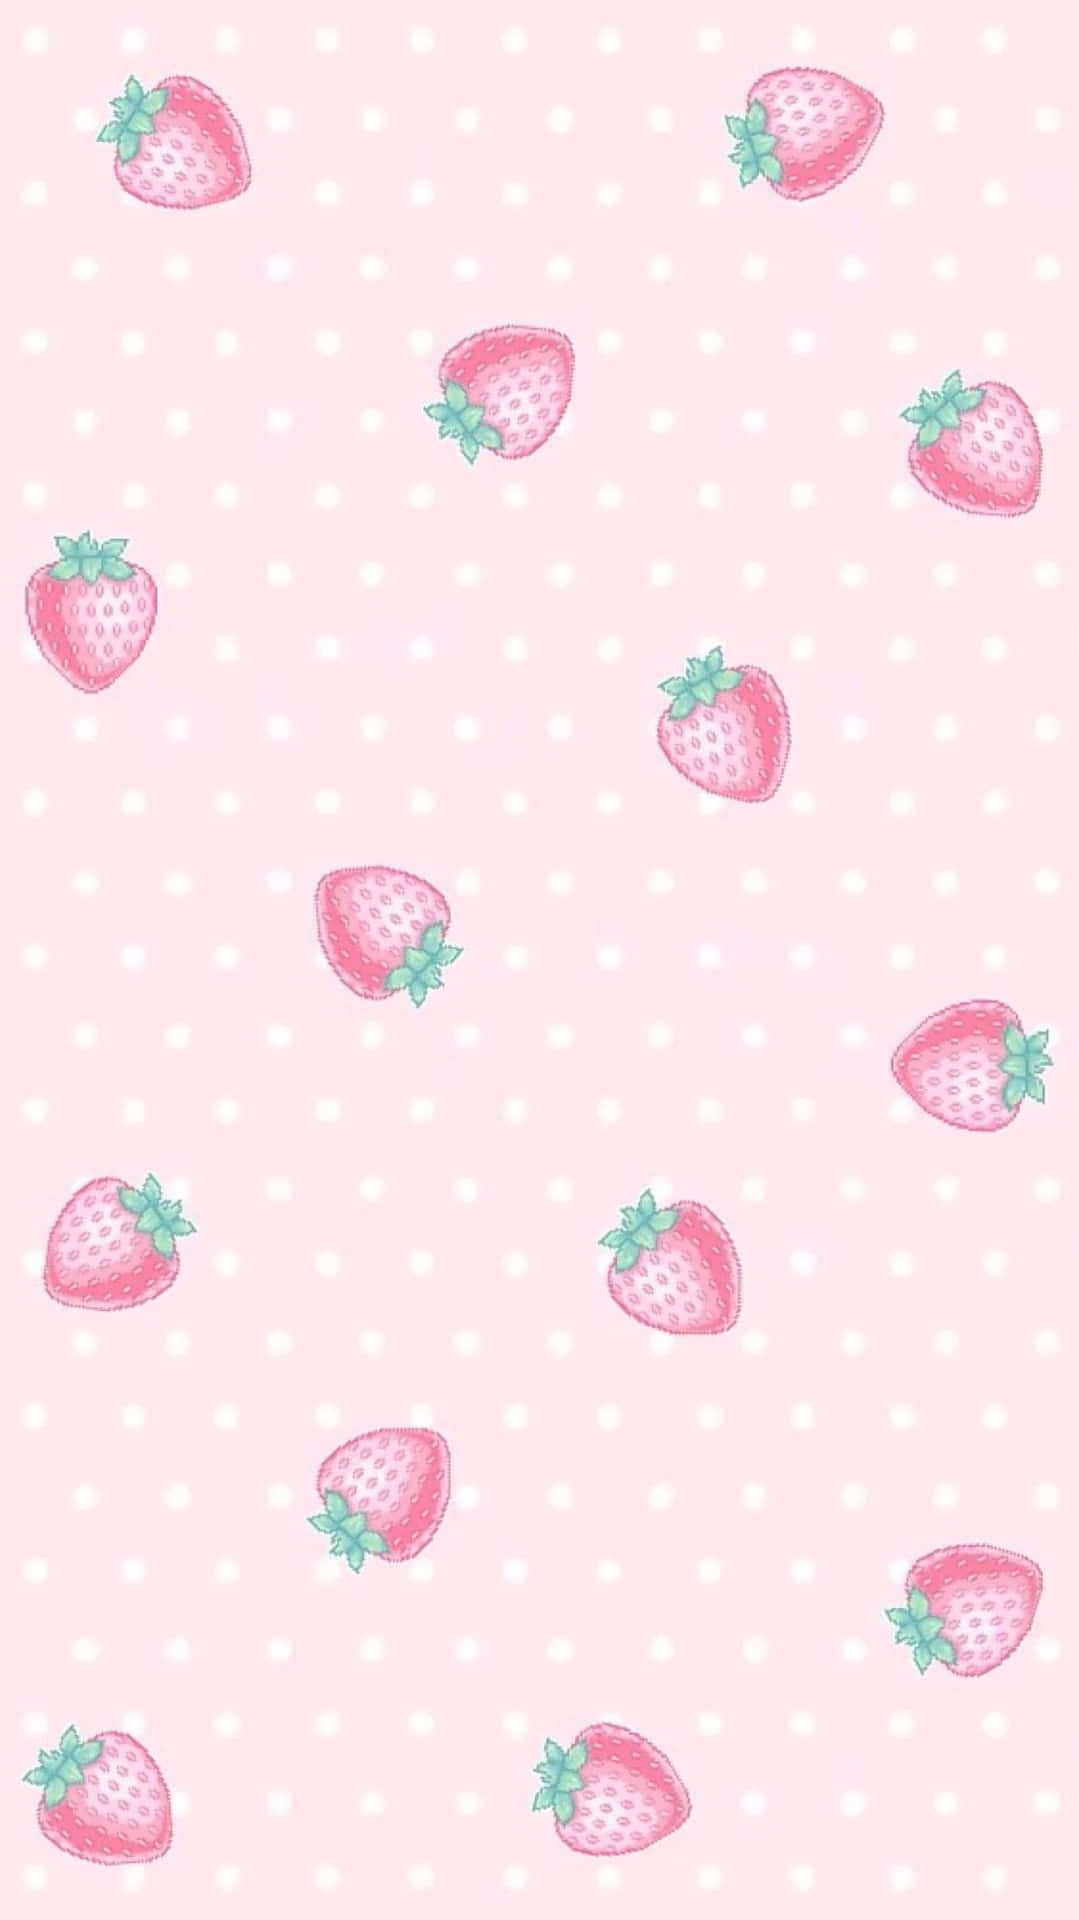 Download Light Pink Aesthetic Cute Strawberry Wallpaper.. Wallpaper iphone cute, Sassy wallpaper, Kawaii wallpaper